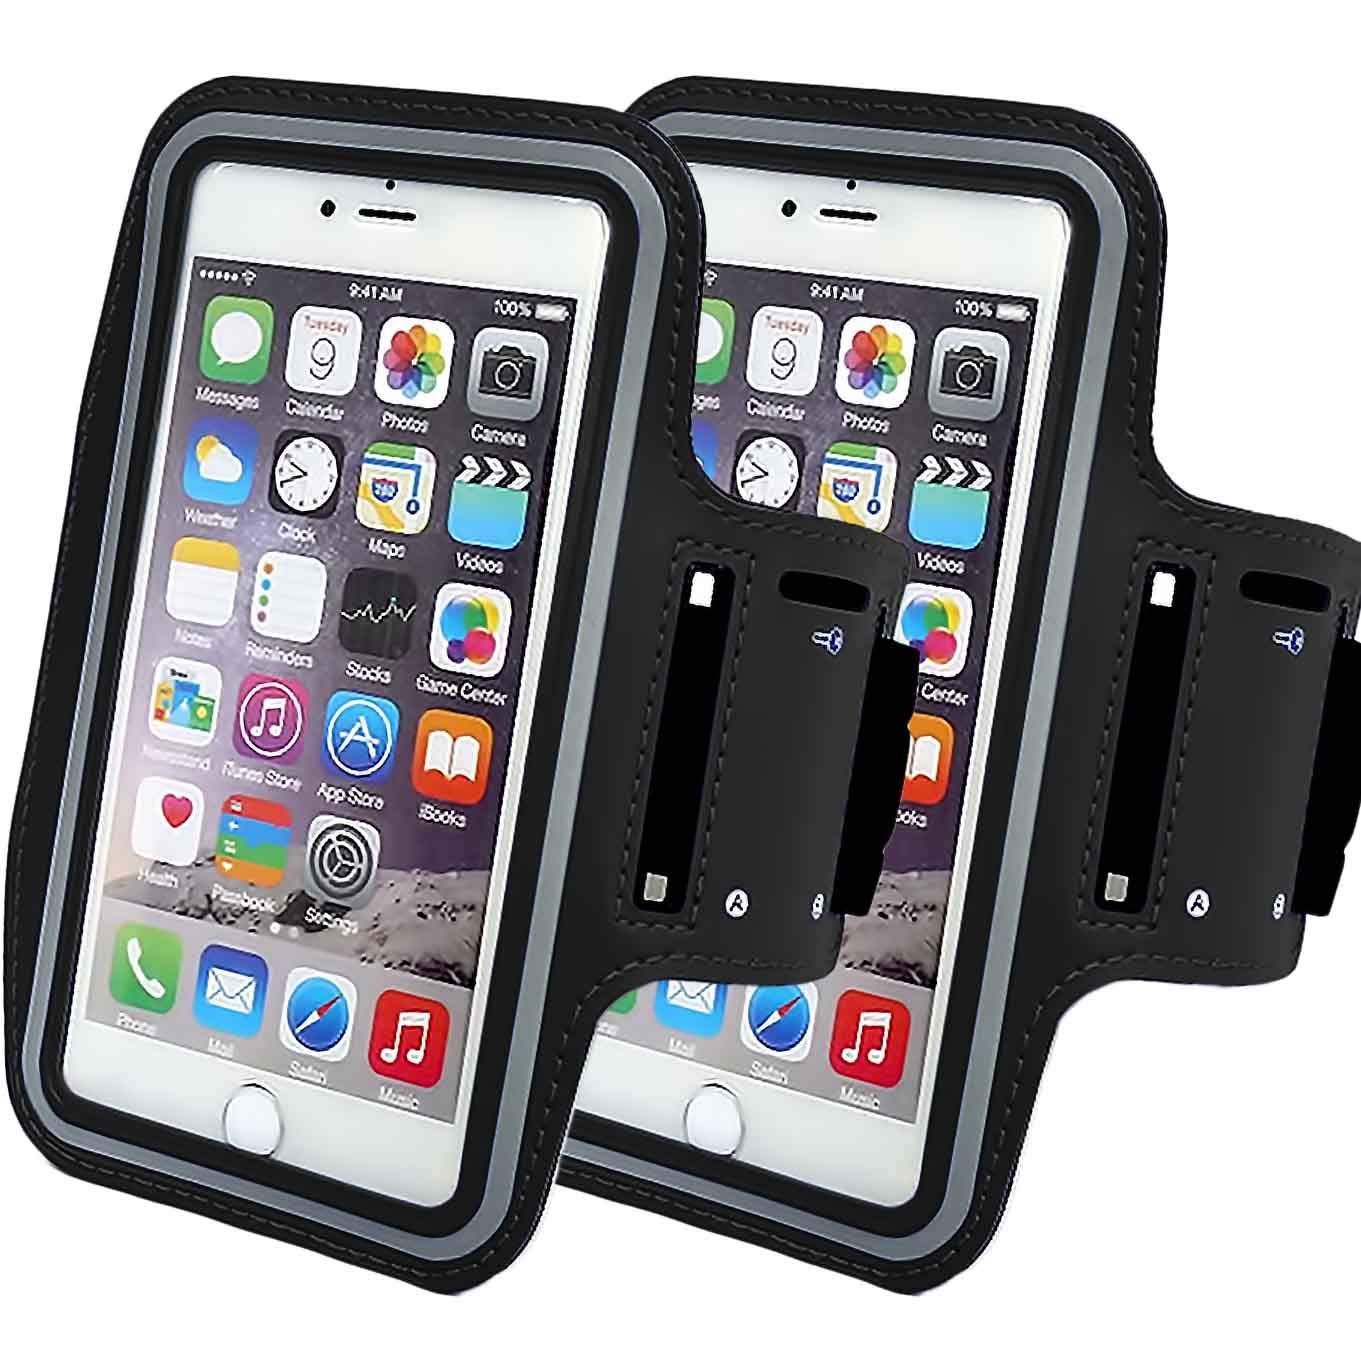 2Pack Phone Armband Sleeve Best Running Sports Arm Band Strap Holder Pouch Case Gifts Exercise Workout Fits iPhone 6 6S 7 8 X XR XS MAX Plus iPod Android, Galaxy S8 S9 Note 5 9 Edge-Black+Black